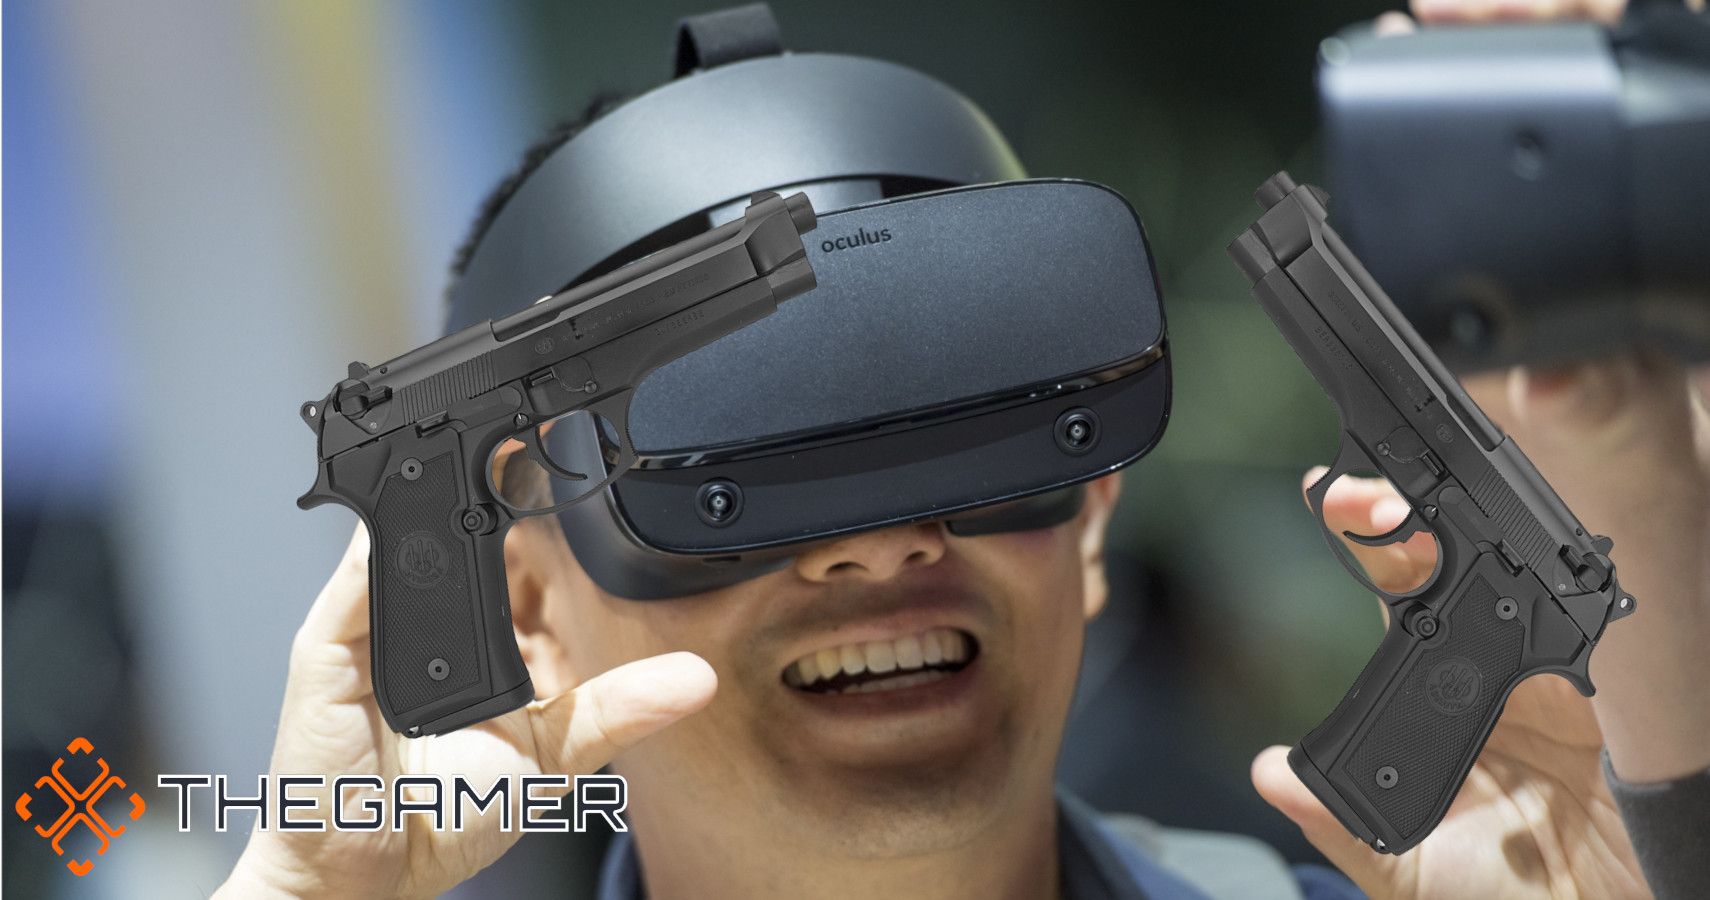 a person in an occulus quest vr headset holding two handguns